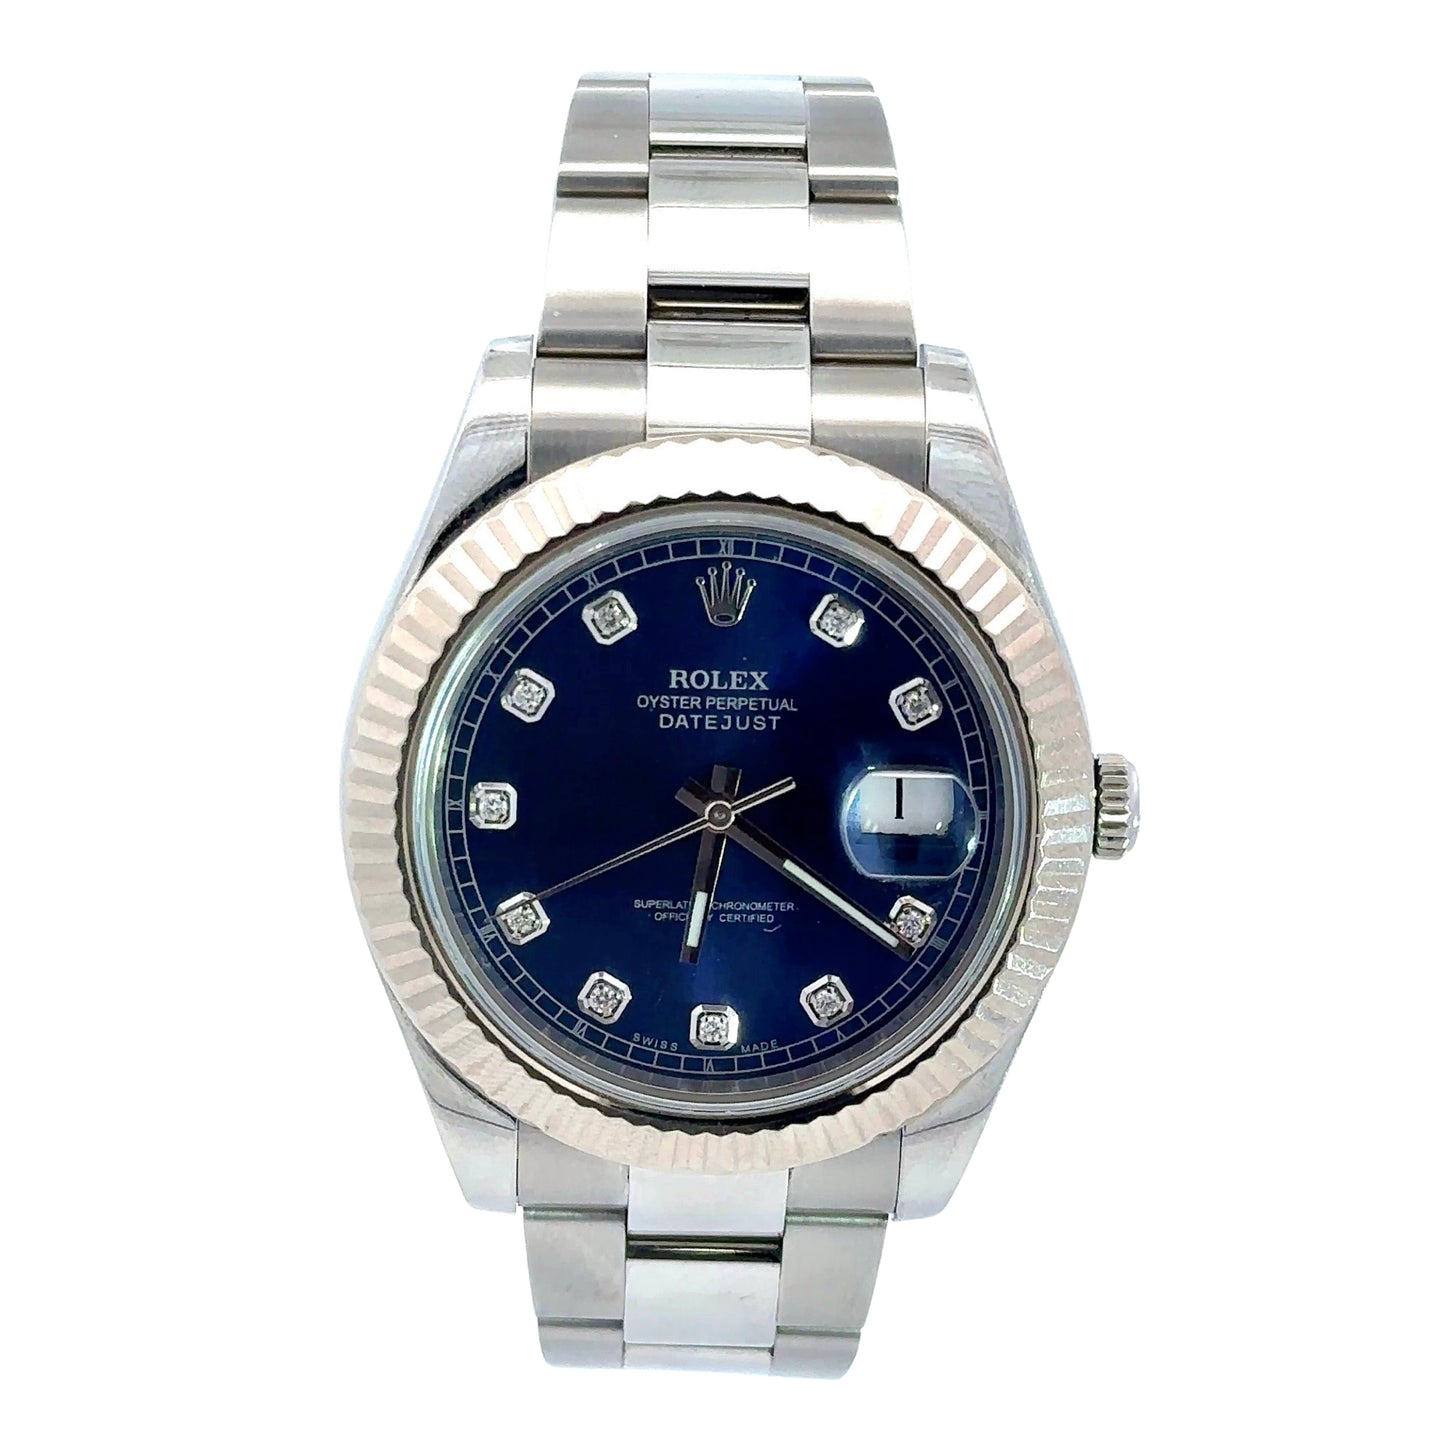 Face of Rolex. Blue face with 10 diamond hour markers, fluted bezel, + oyster band